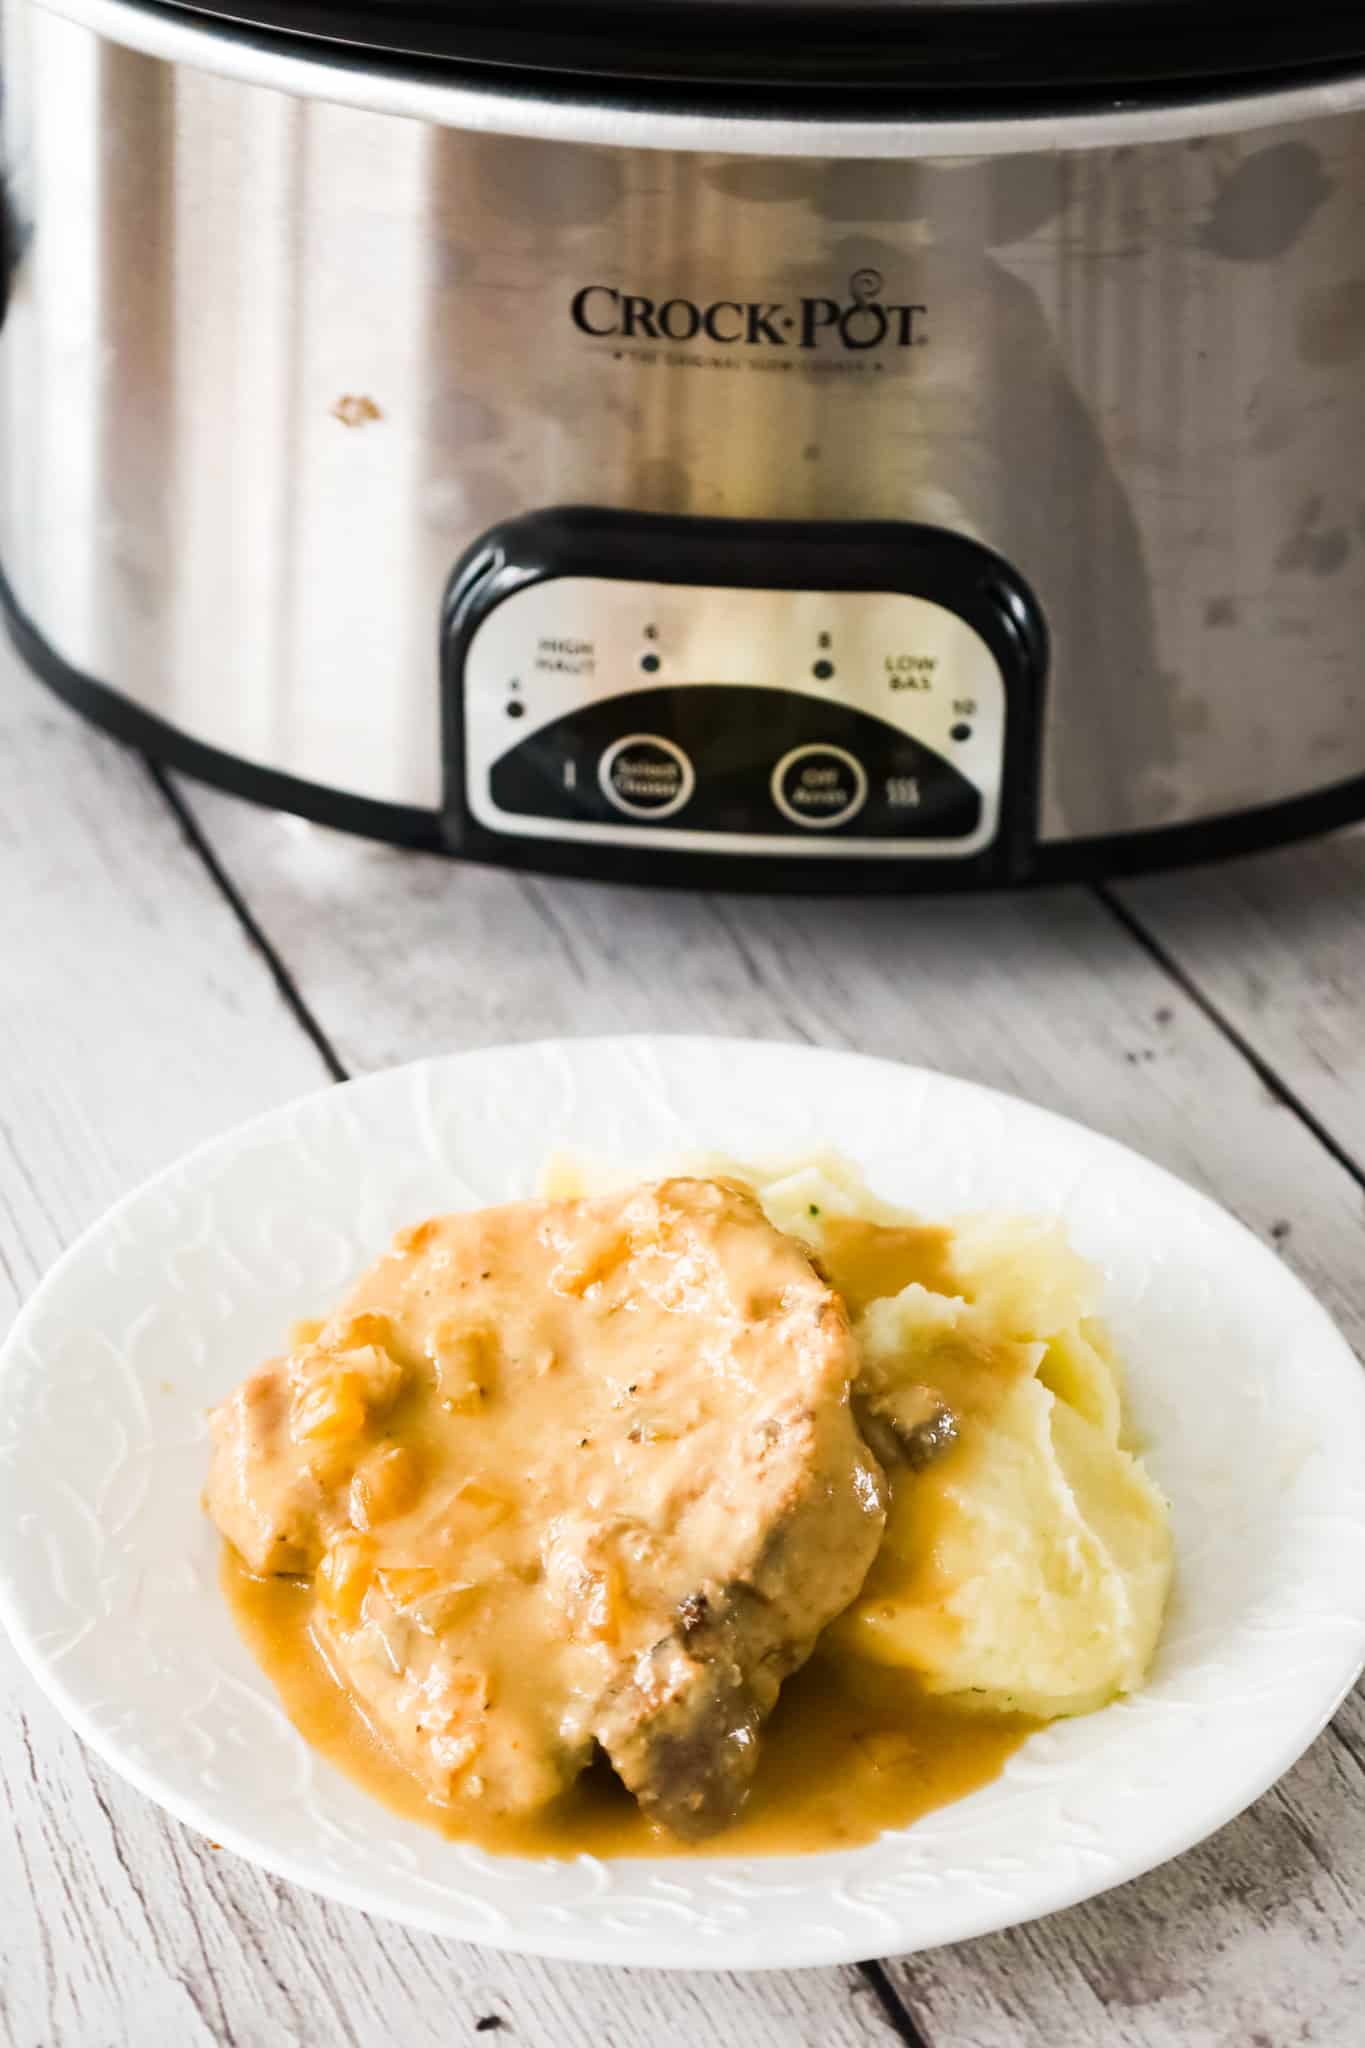 Crock Pot Pork Chops are a delicious slow cooker dinner recipe with bone in pork chops cooked in a creamy mushroom gravy.